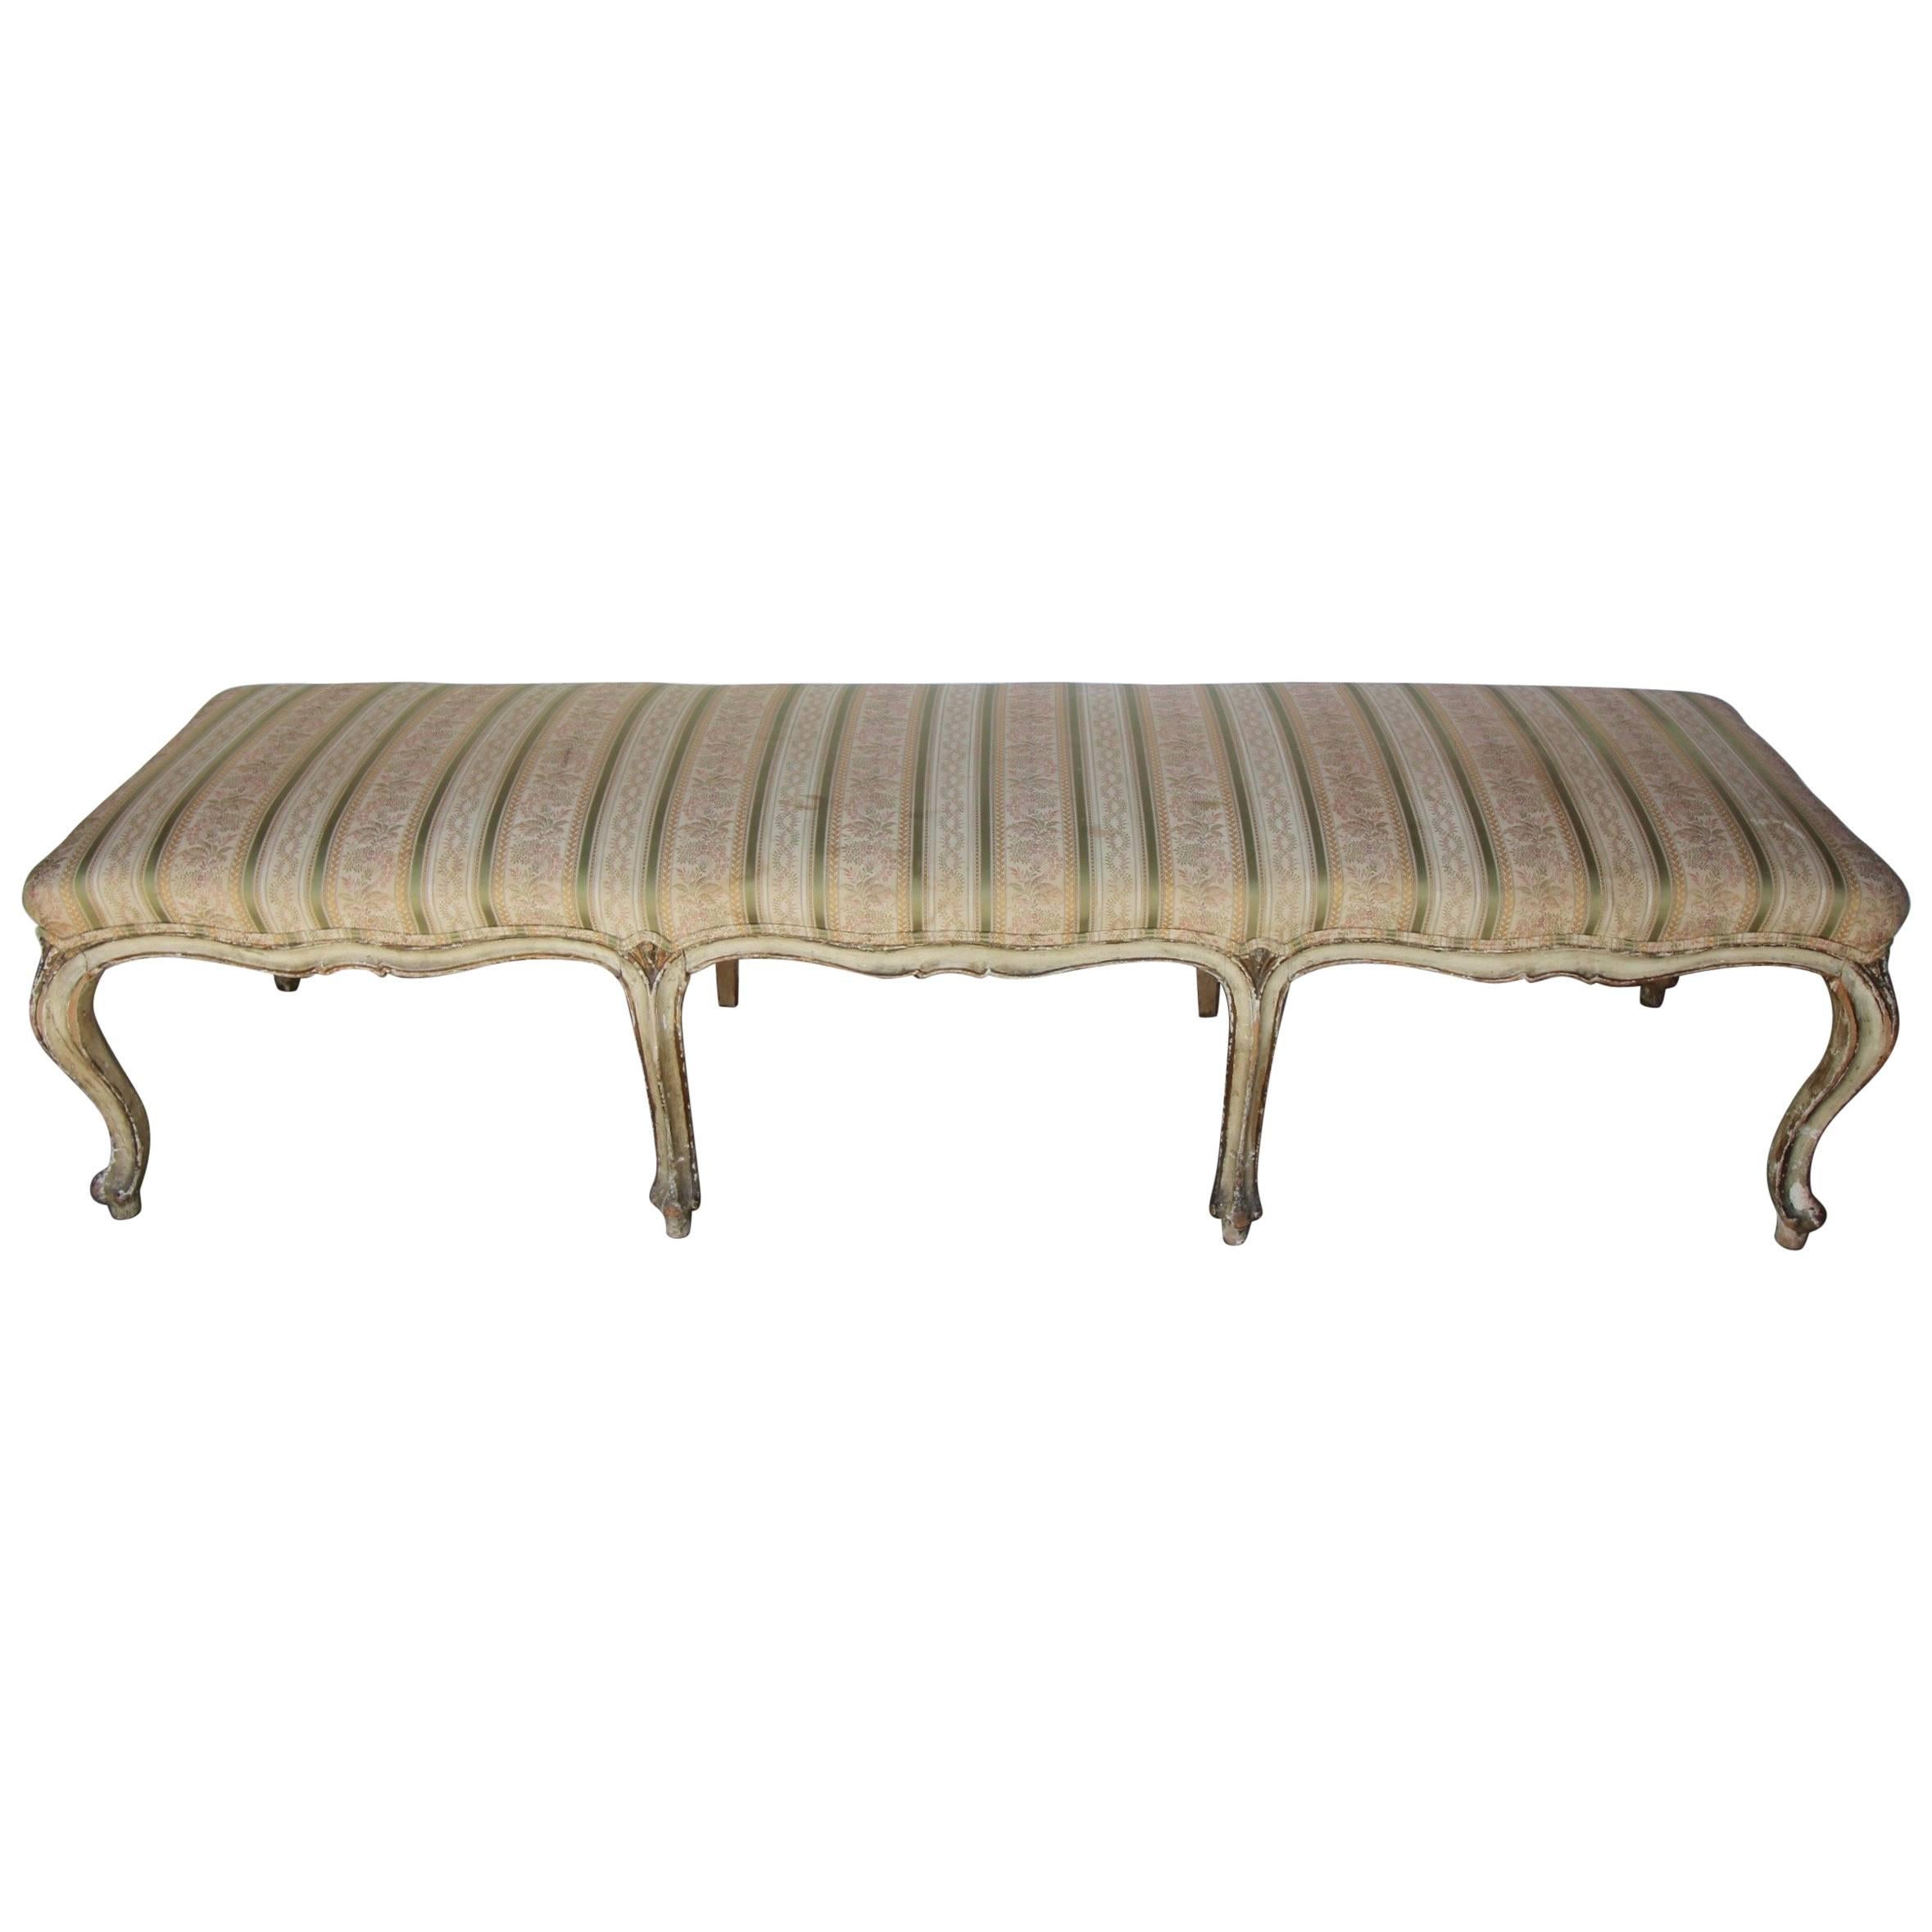 18th Century French Louis XV Painted Banquette or Bench For Sale